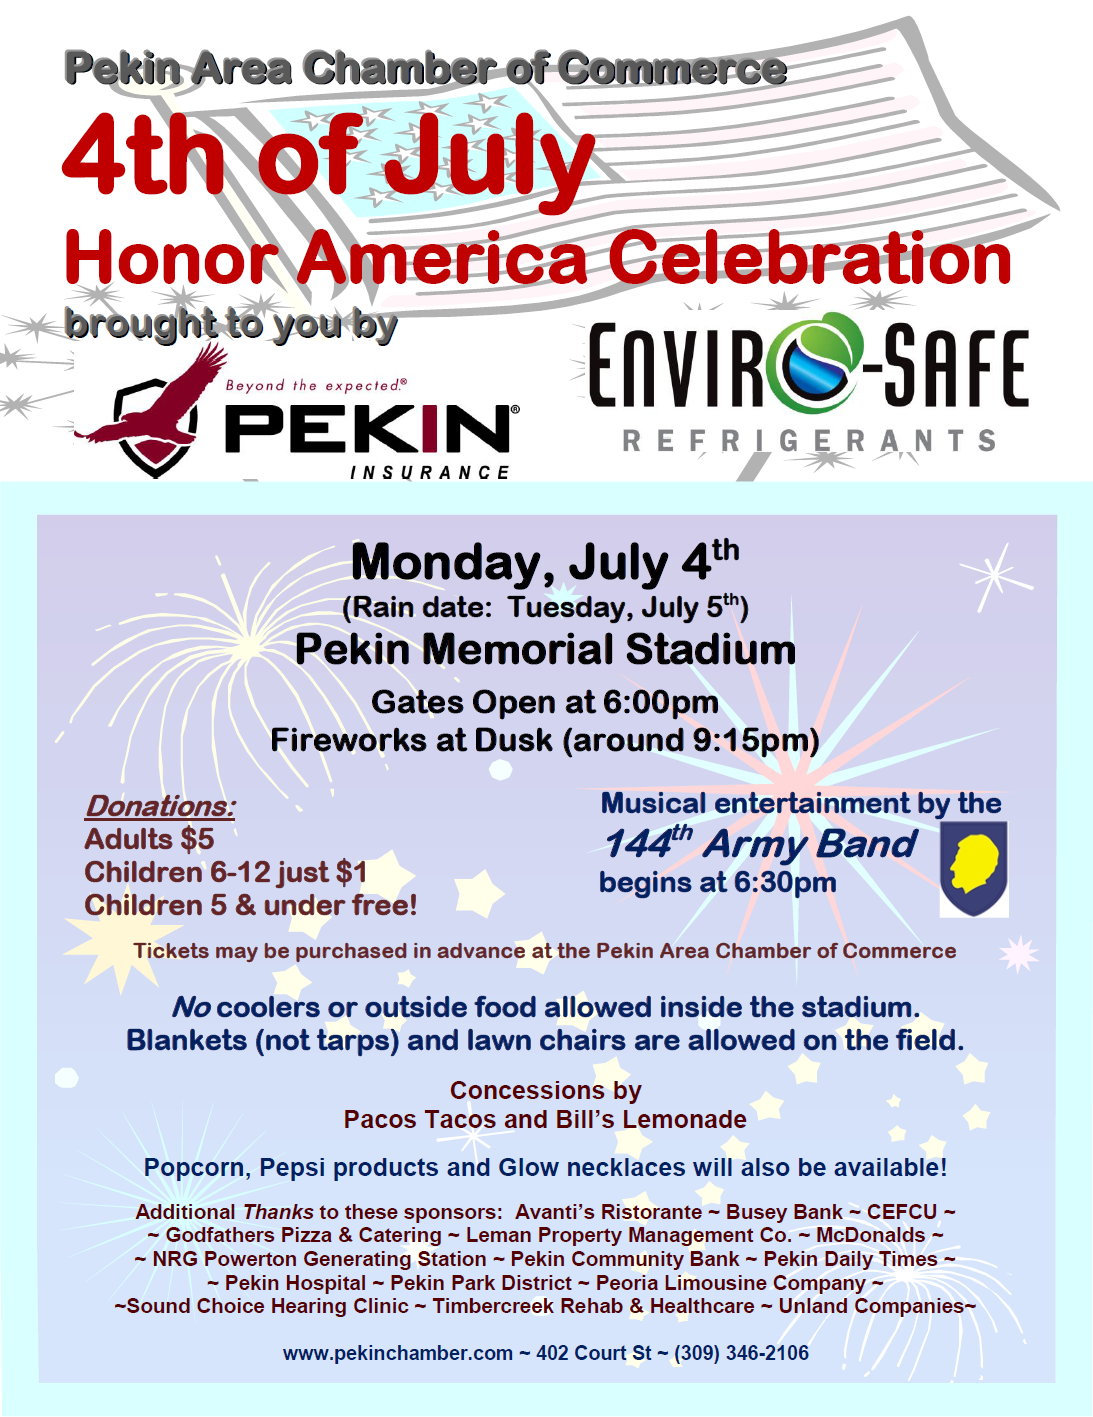 4th of July Honor America Celebration